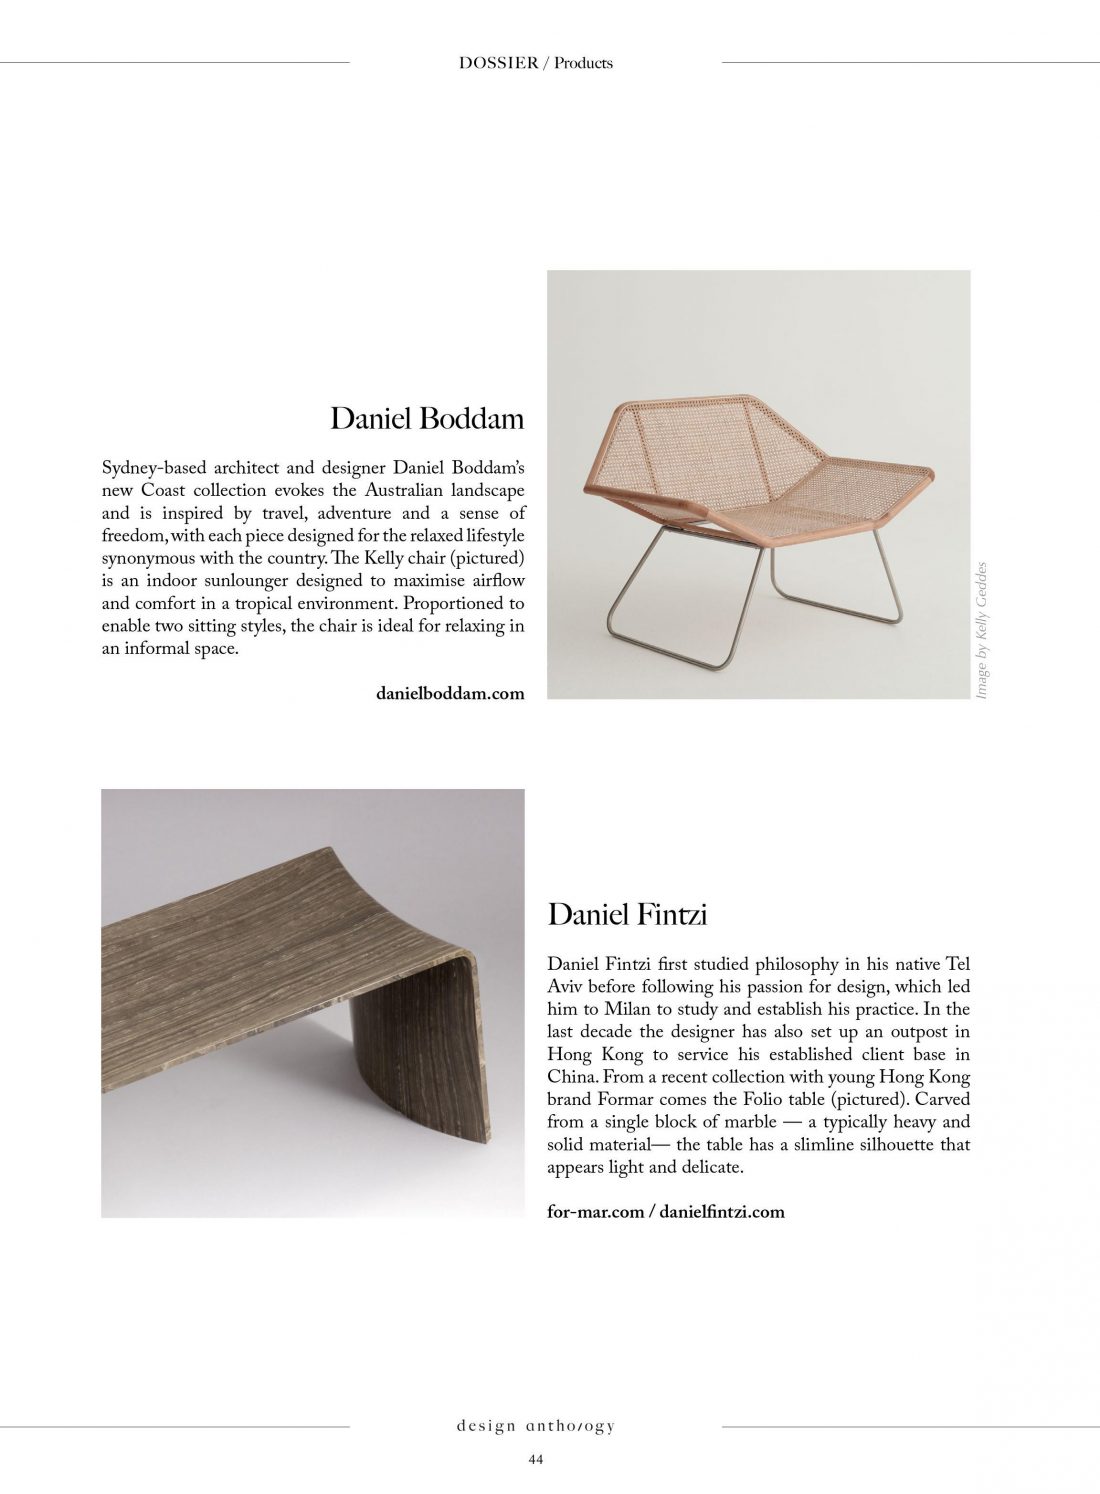 Design Anthology Issue 22 - Kelly Chair